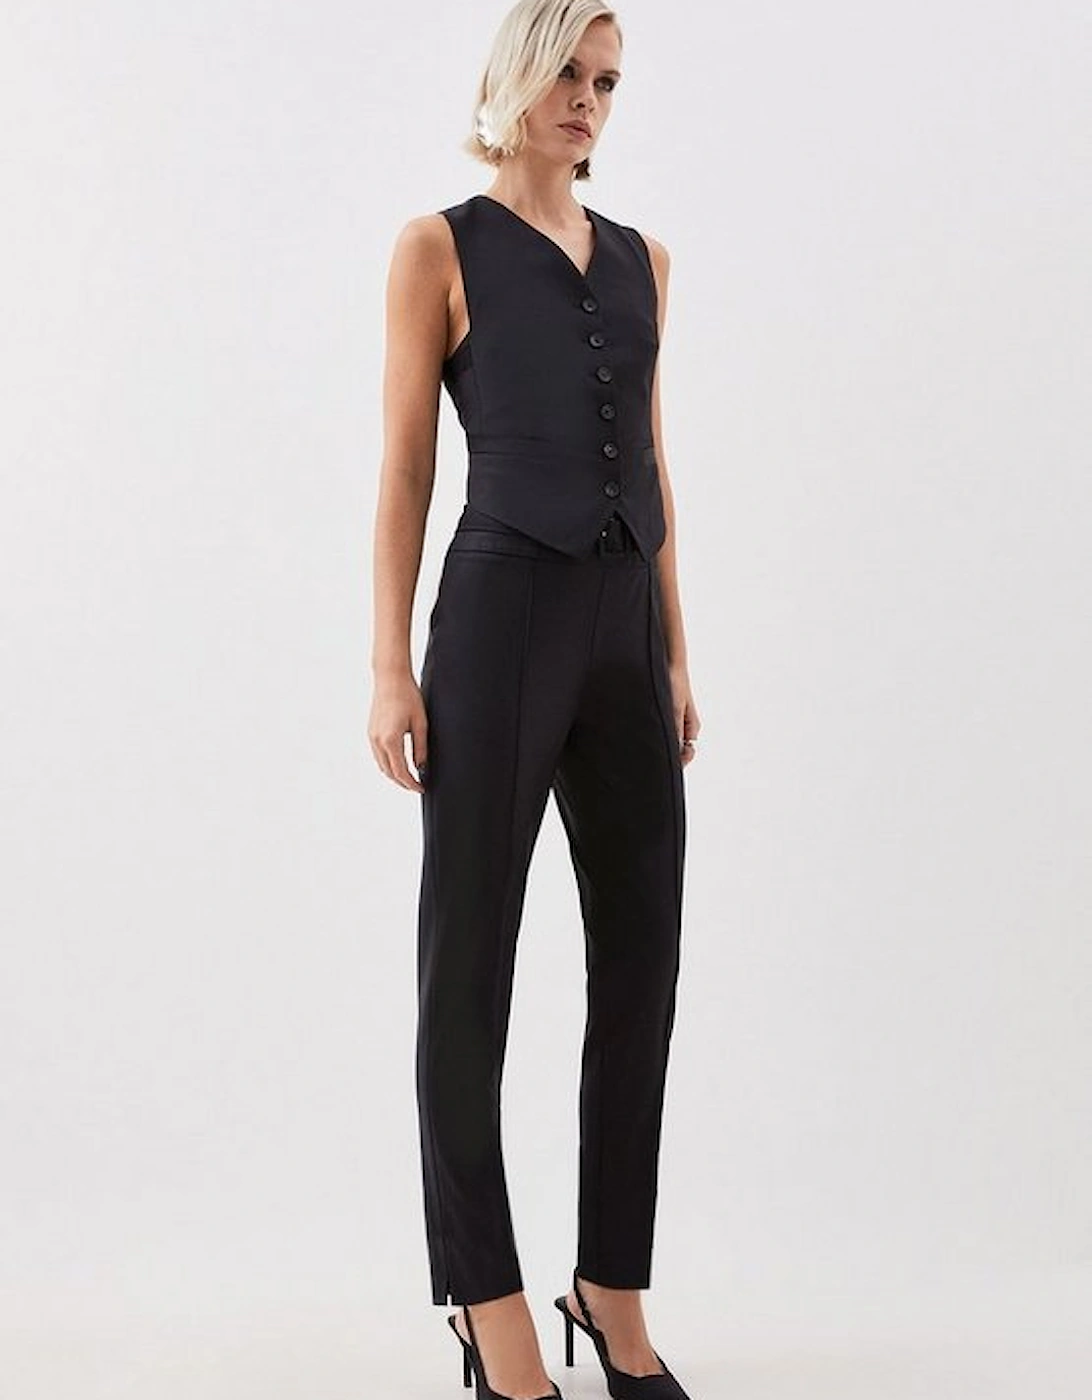 The Founder Tailored Wool Blend High Waist Belted Slim Leg Trousers